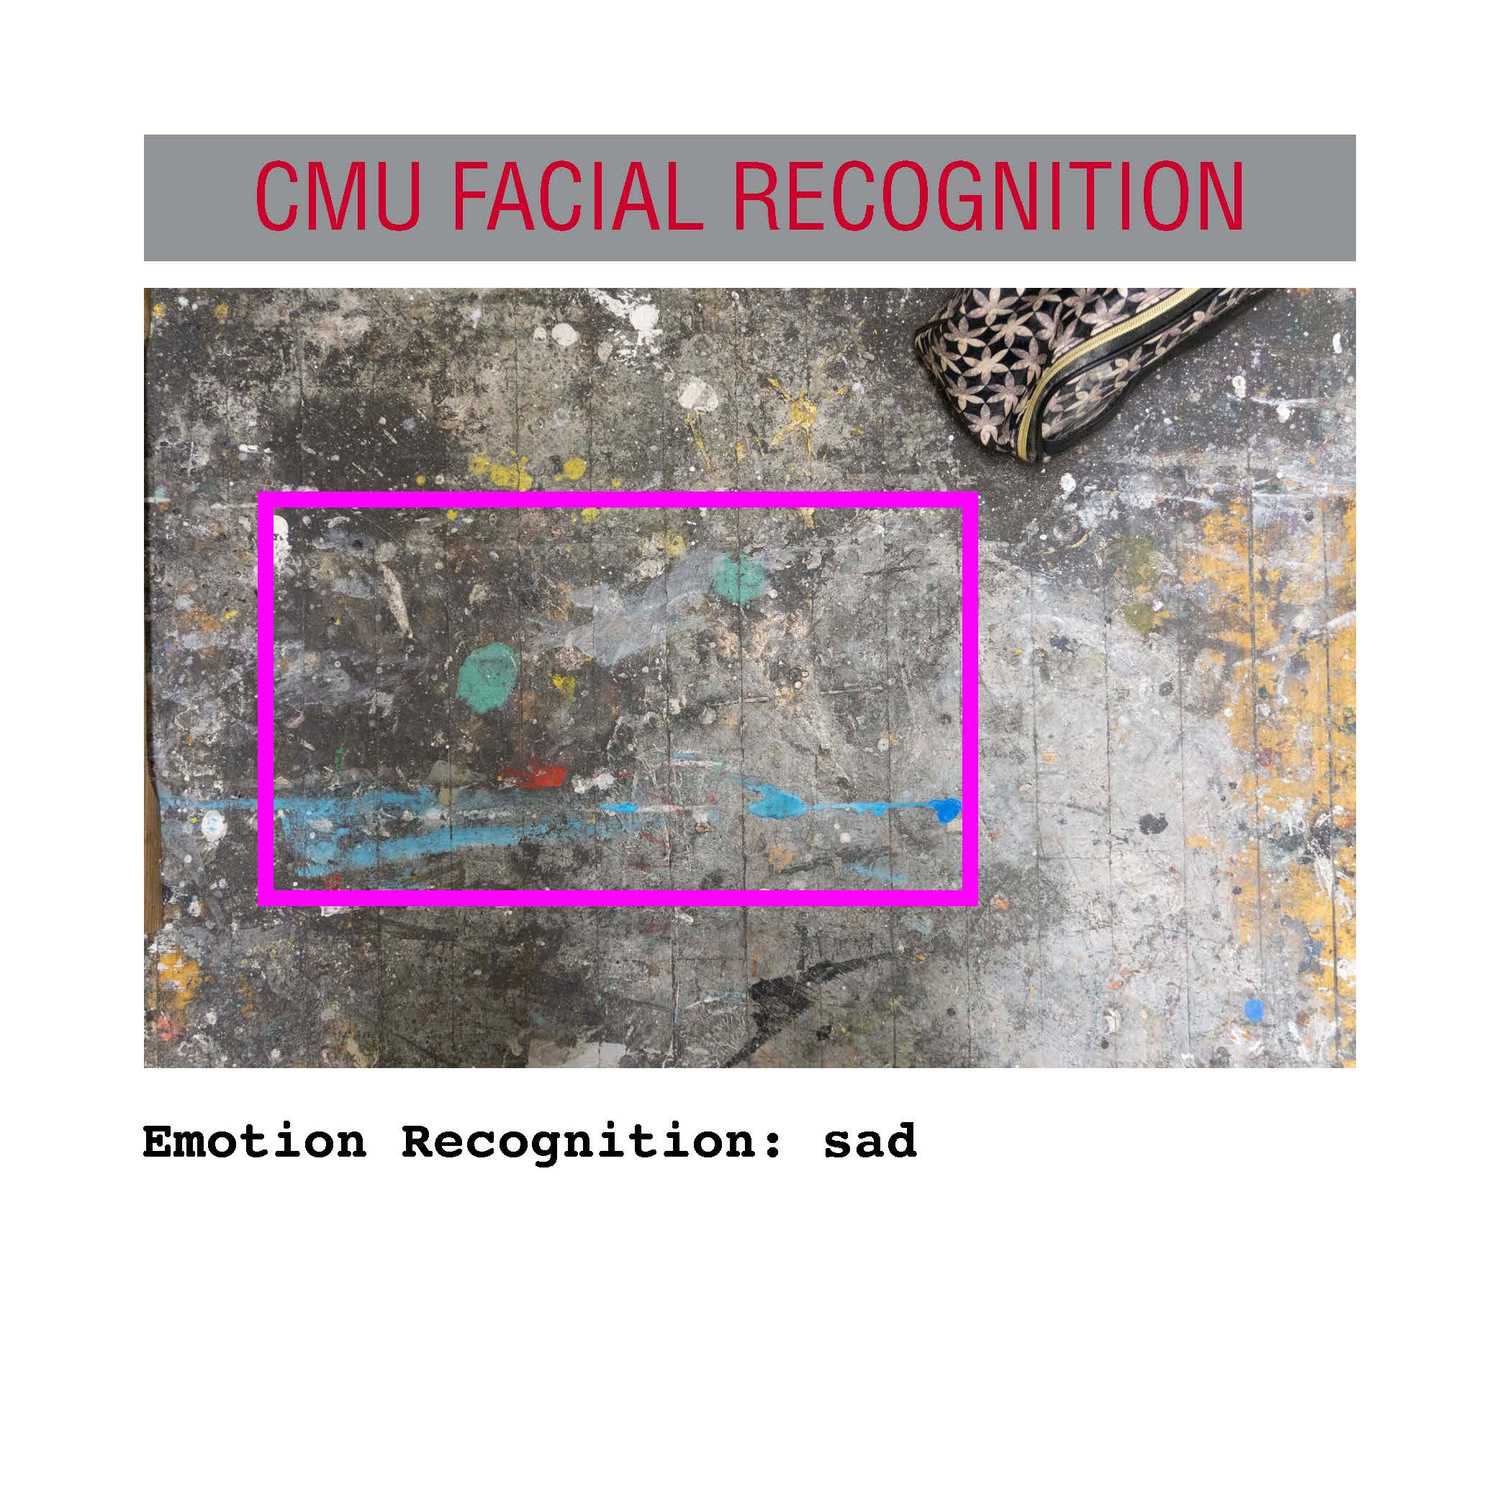 facial recognition Page 01